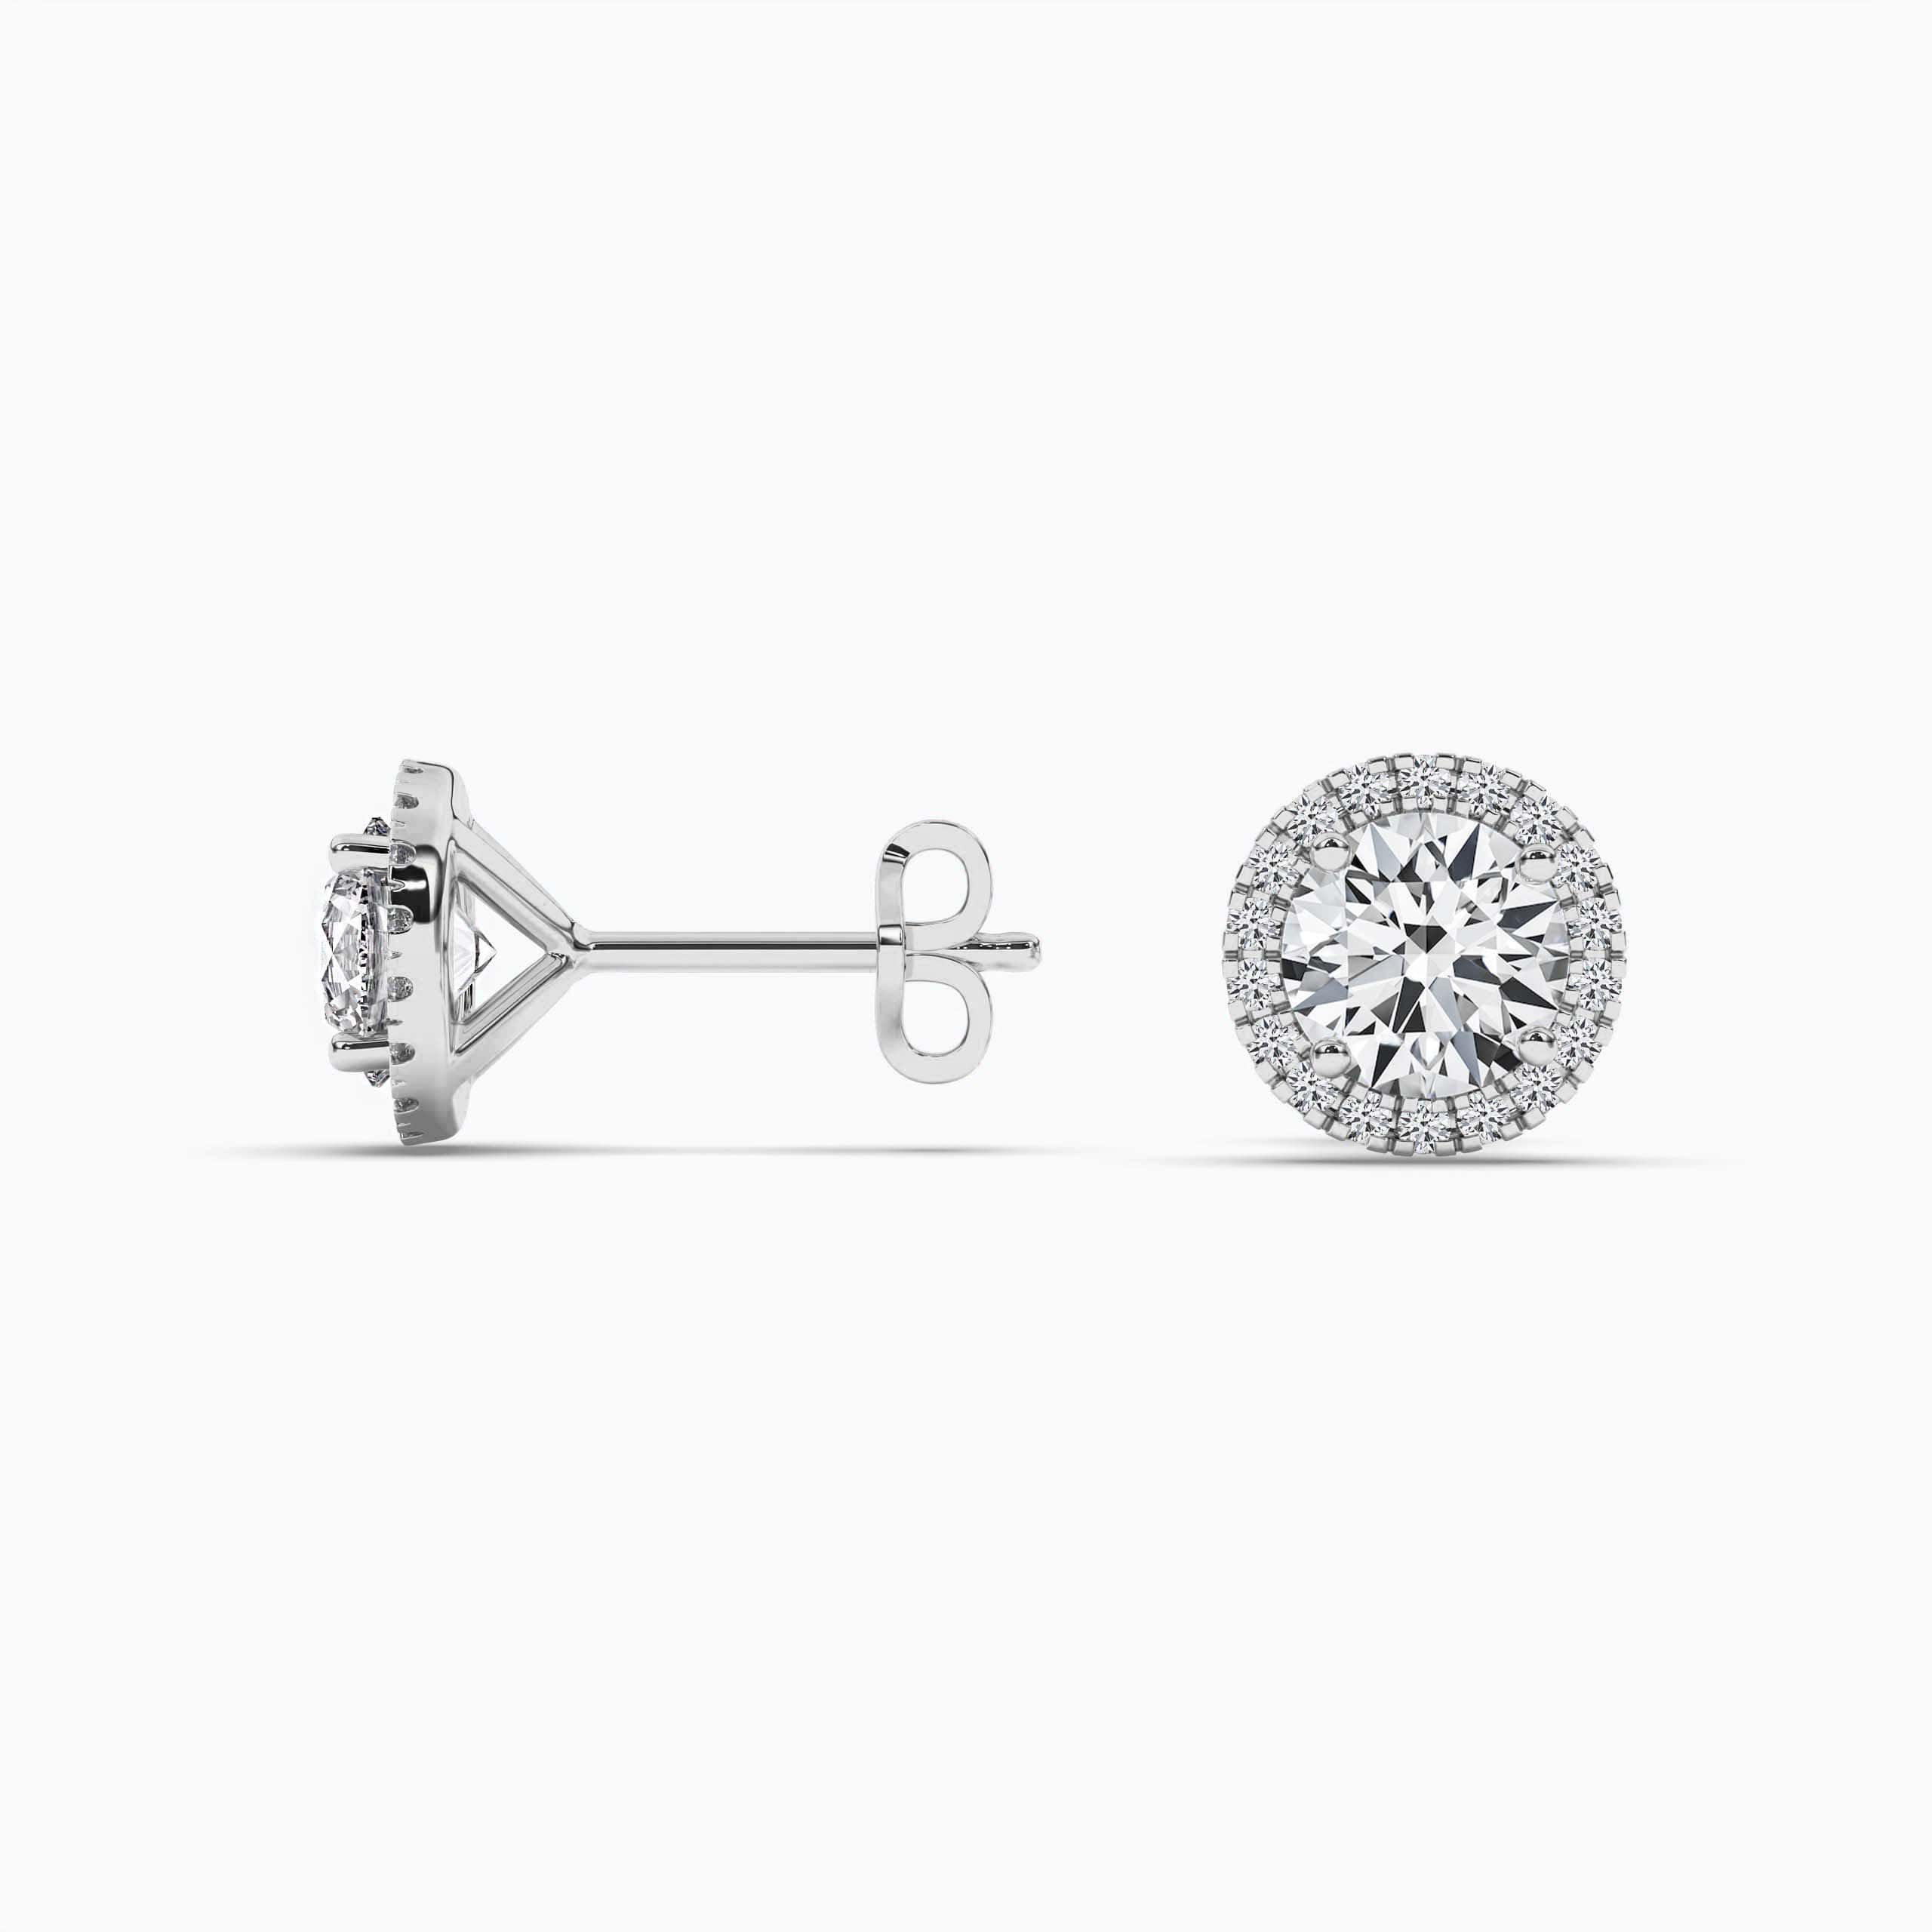 Round Halo Diamond Stud Earrings in White Gold